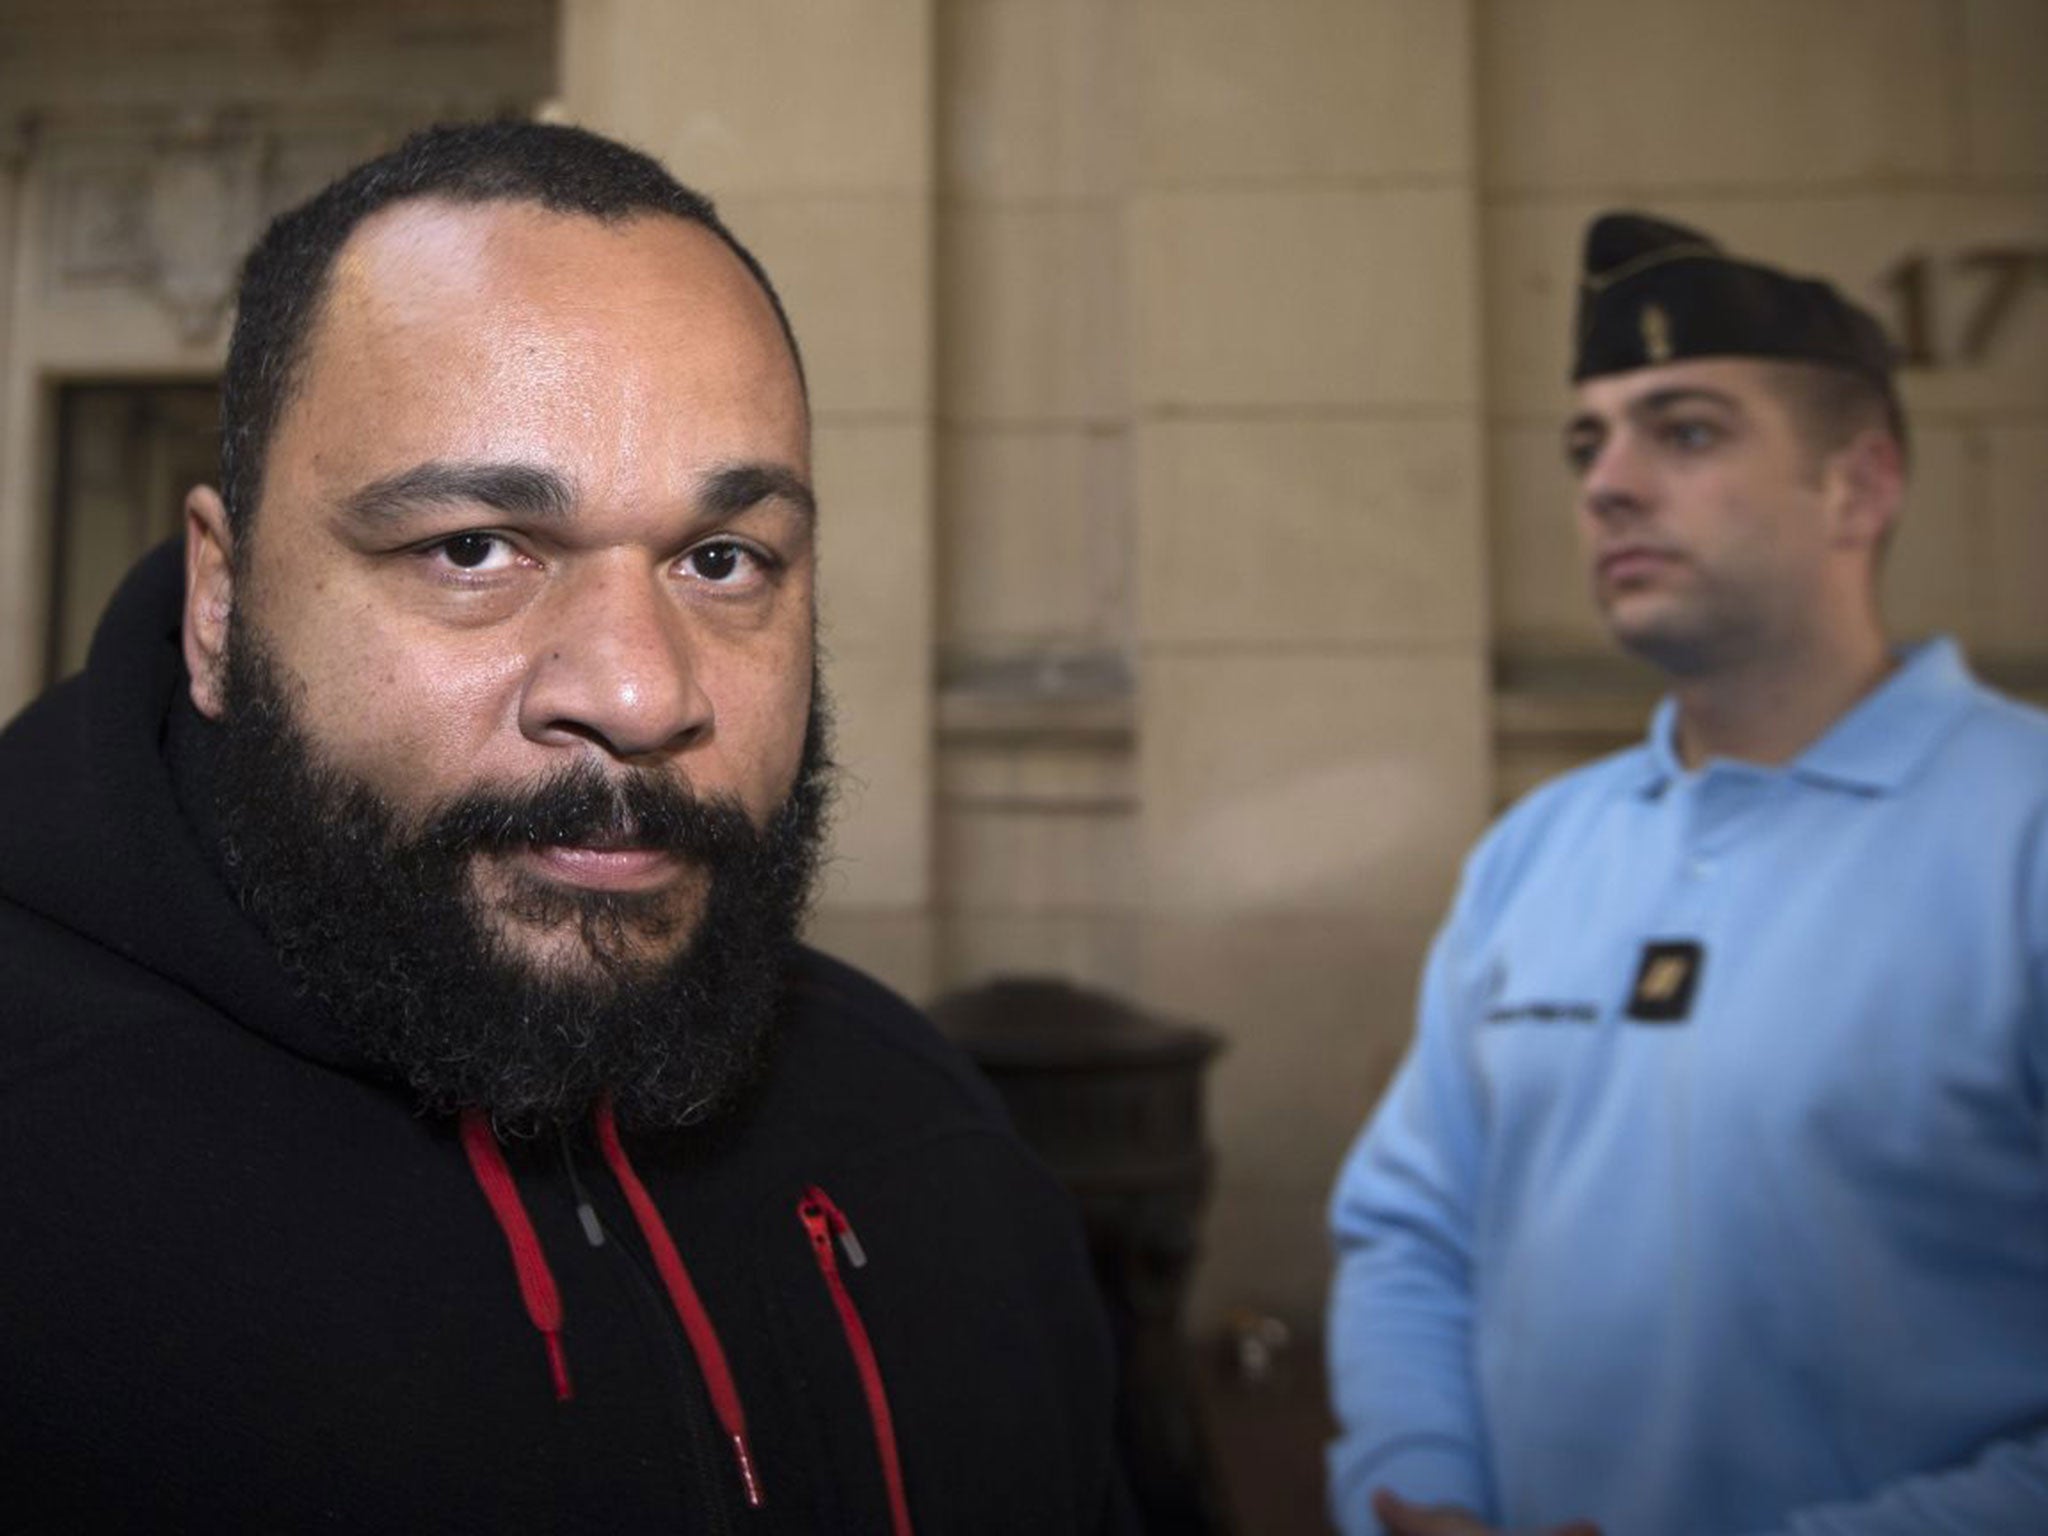 French humorist Dieudonne Mbala Mbala arrives for a trial at the Paris courthouse in December